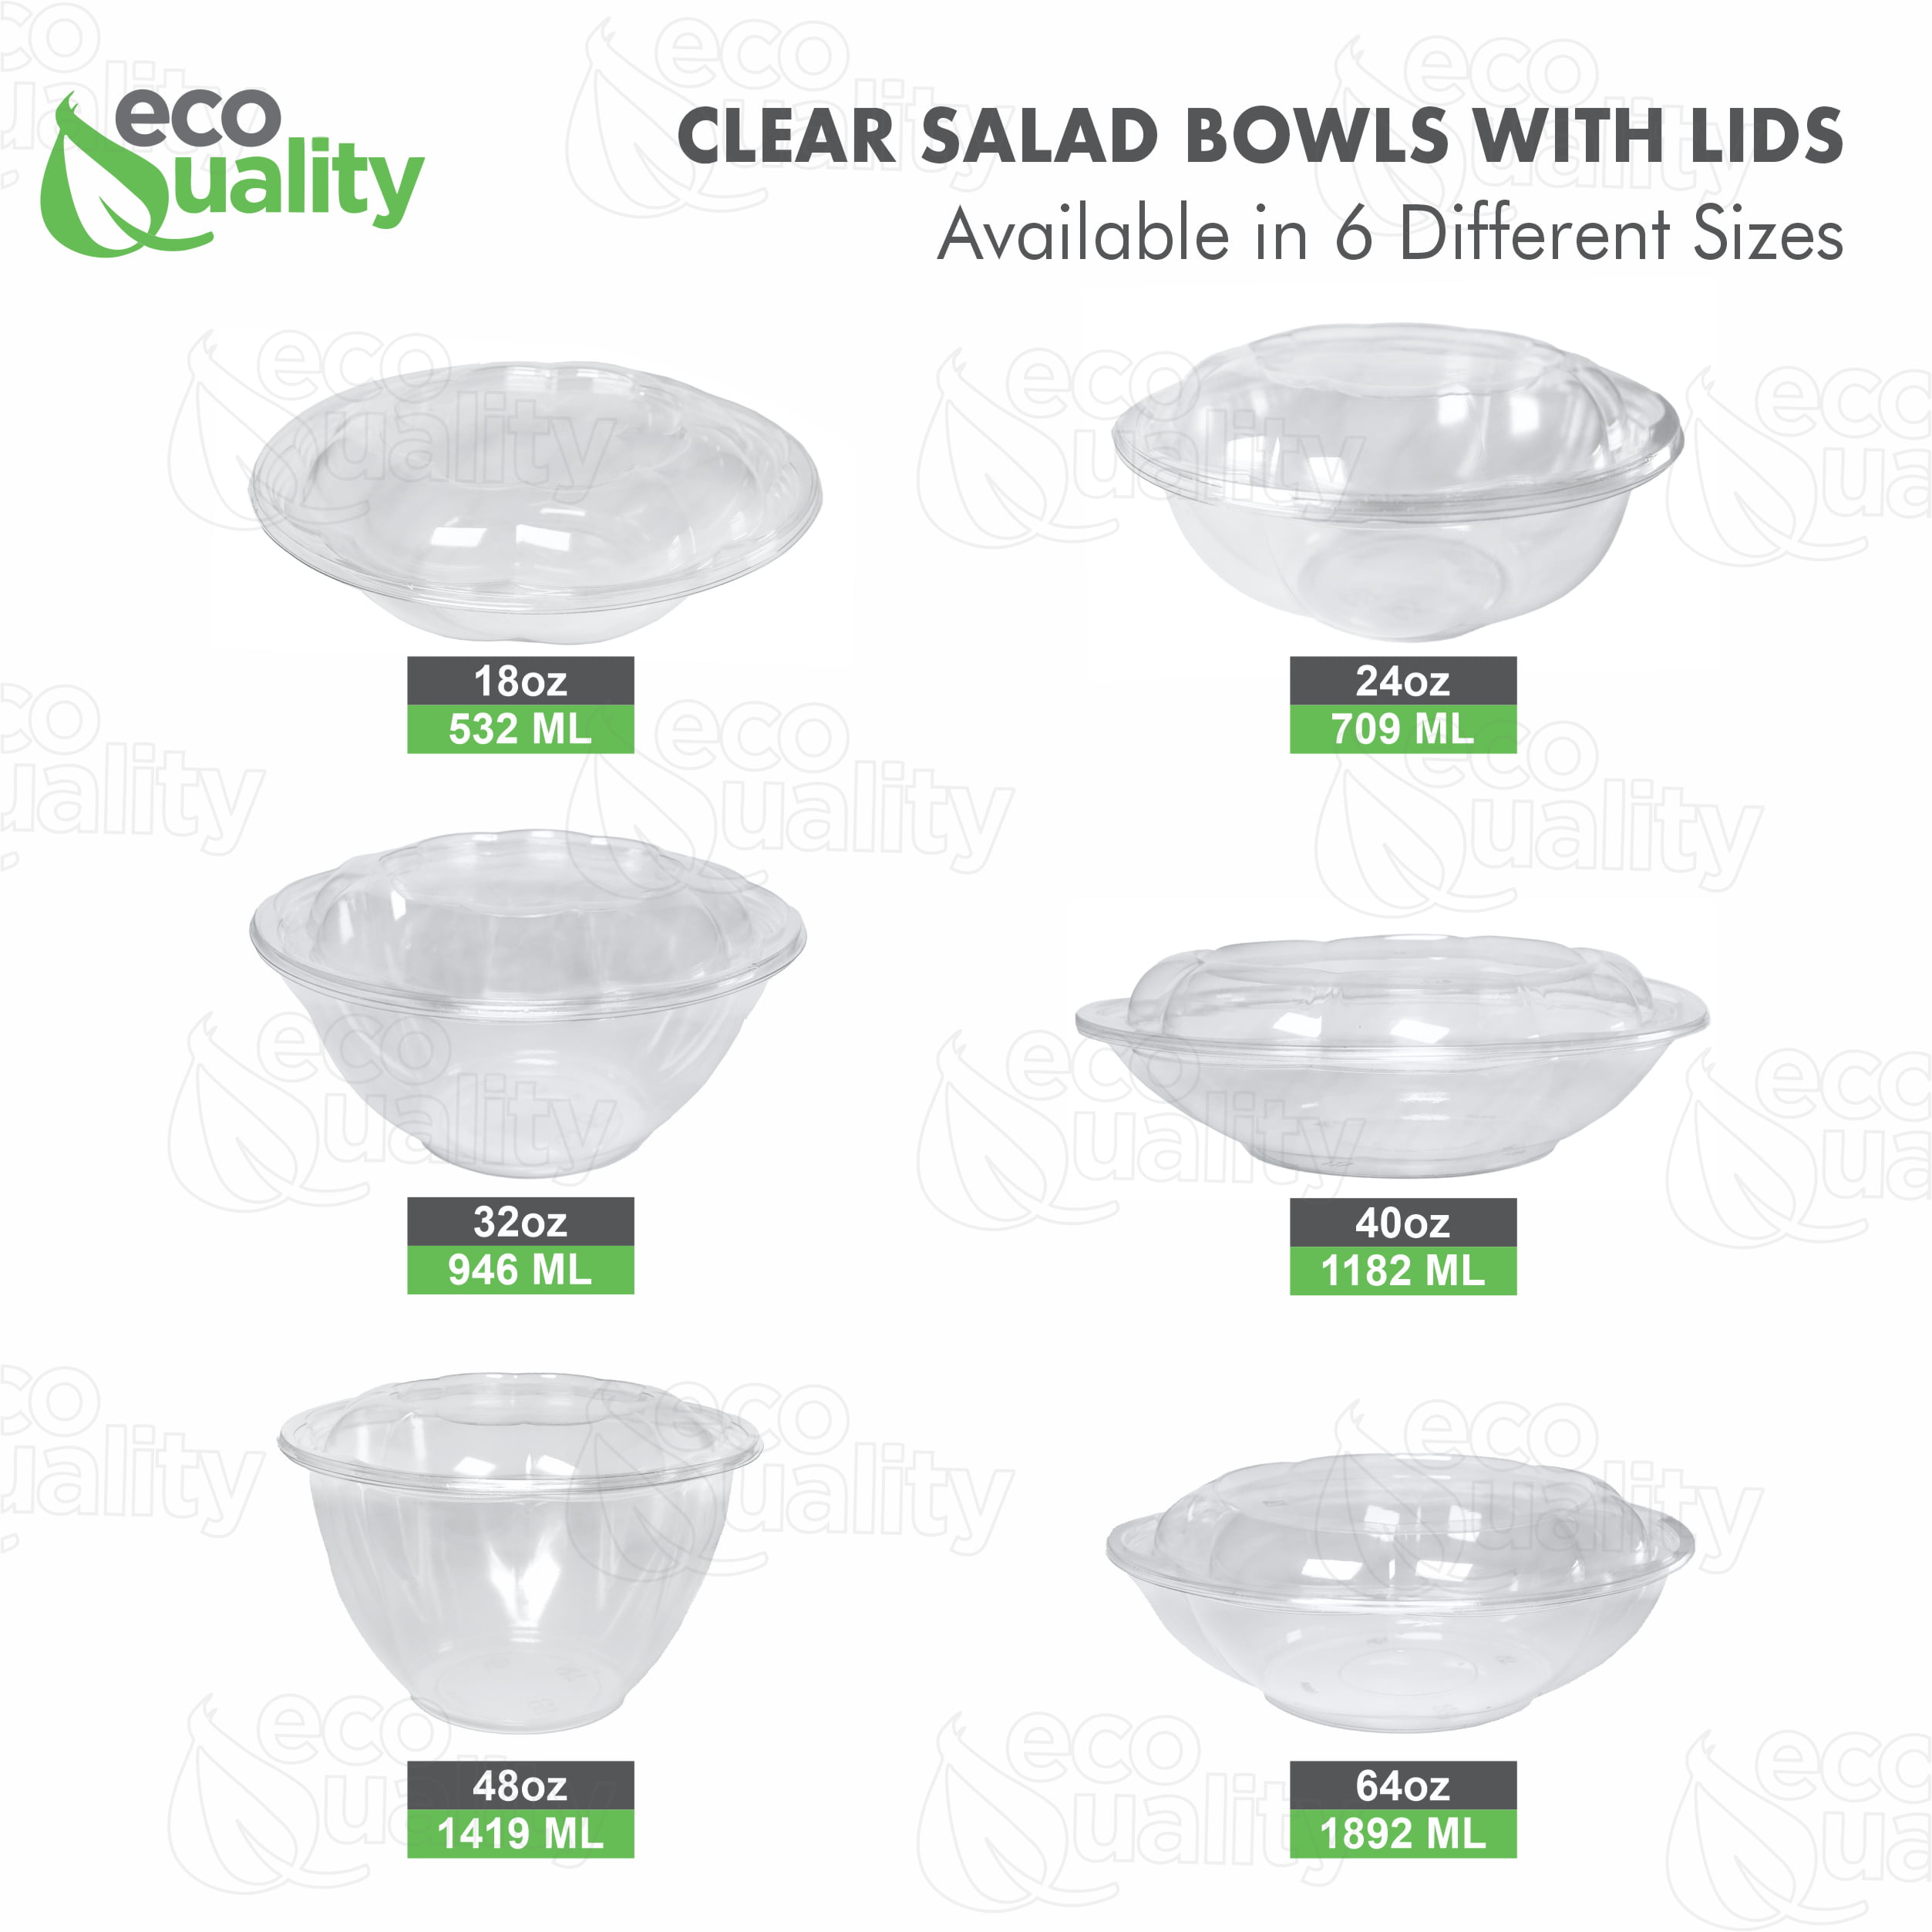 Restaurantware Large Plastic Salad Bowl, Cold Salad Bowl - Durable Pet Plastic - Clear - Use in-house or for To-Go - 21 oz - 200ct Box 